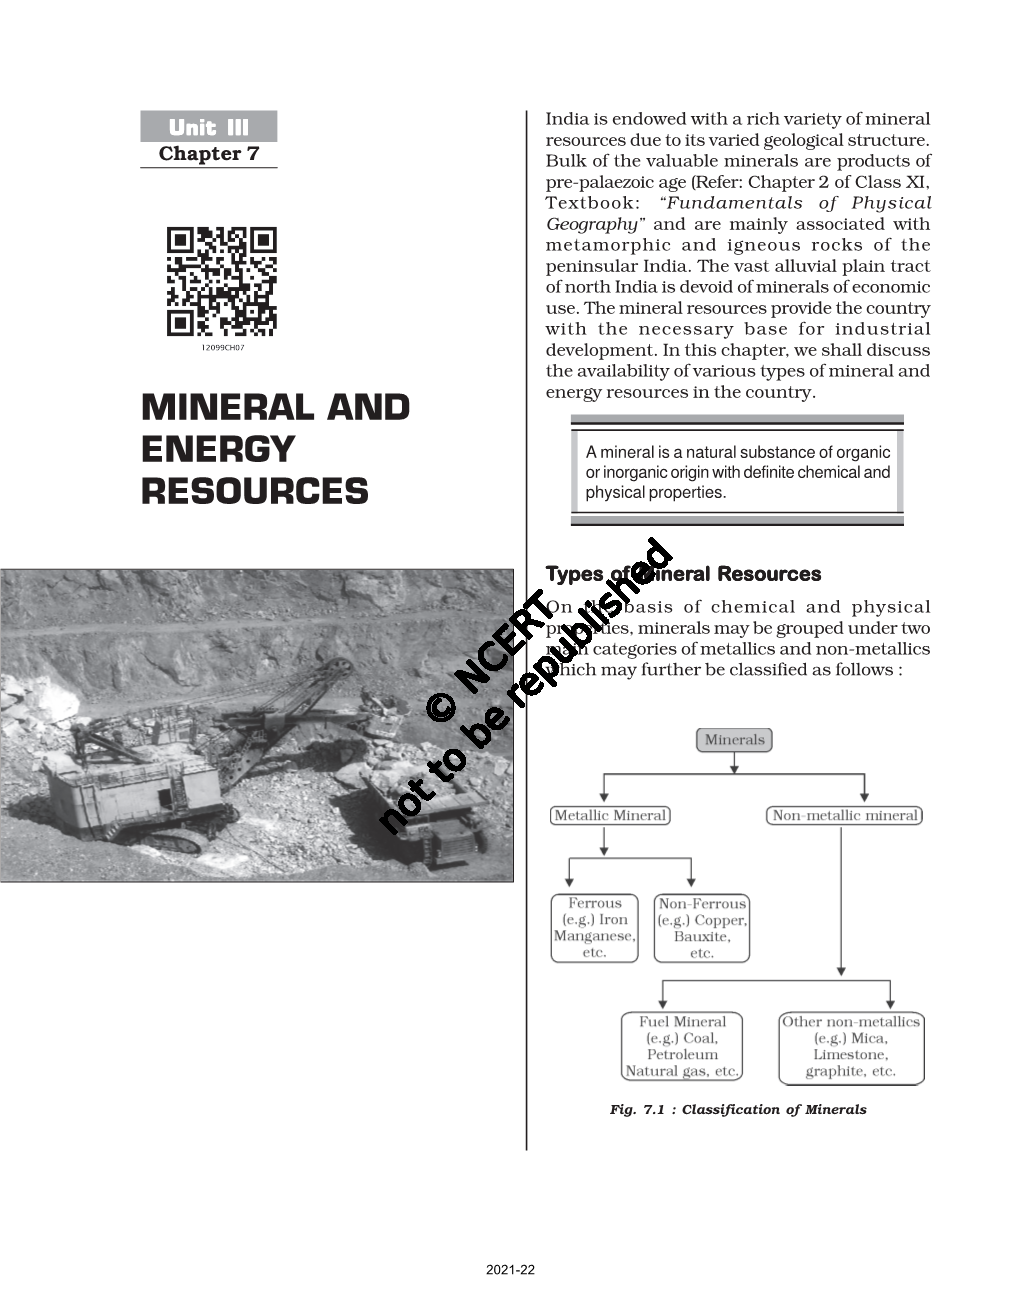 MINERAL and Energy Resources in the Country